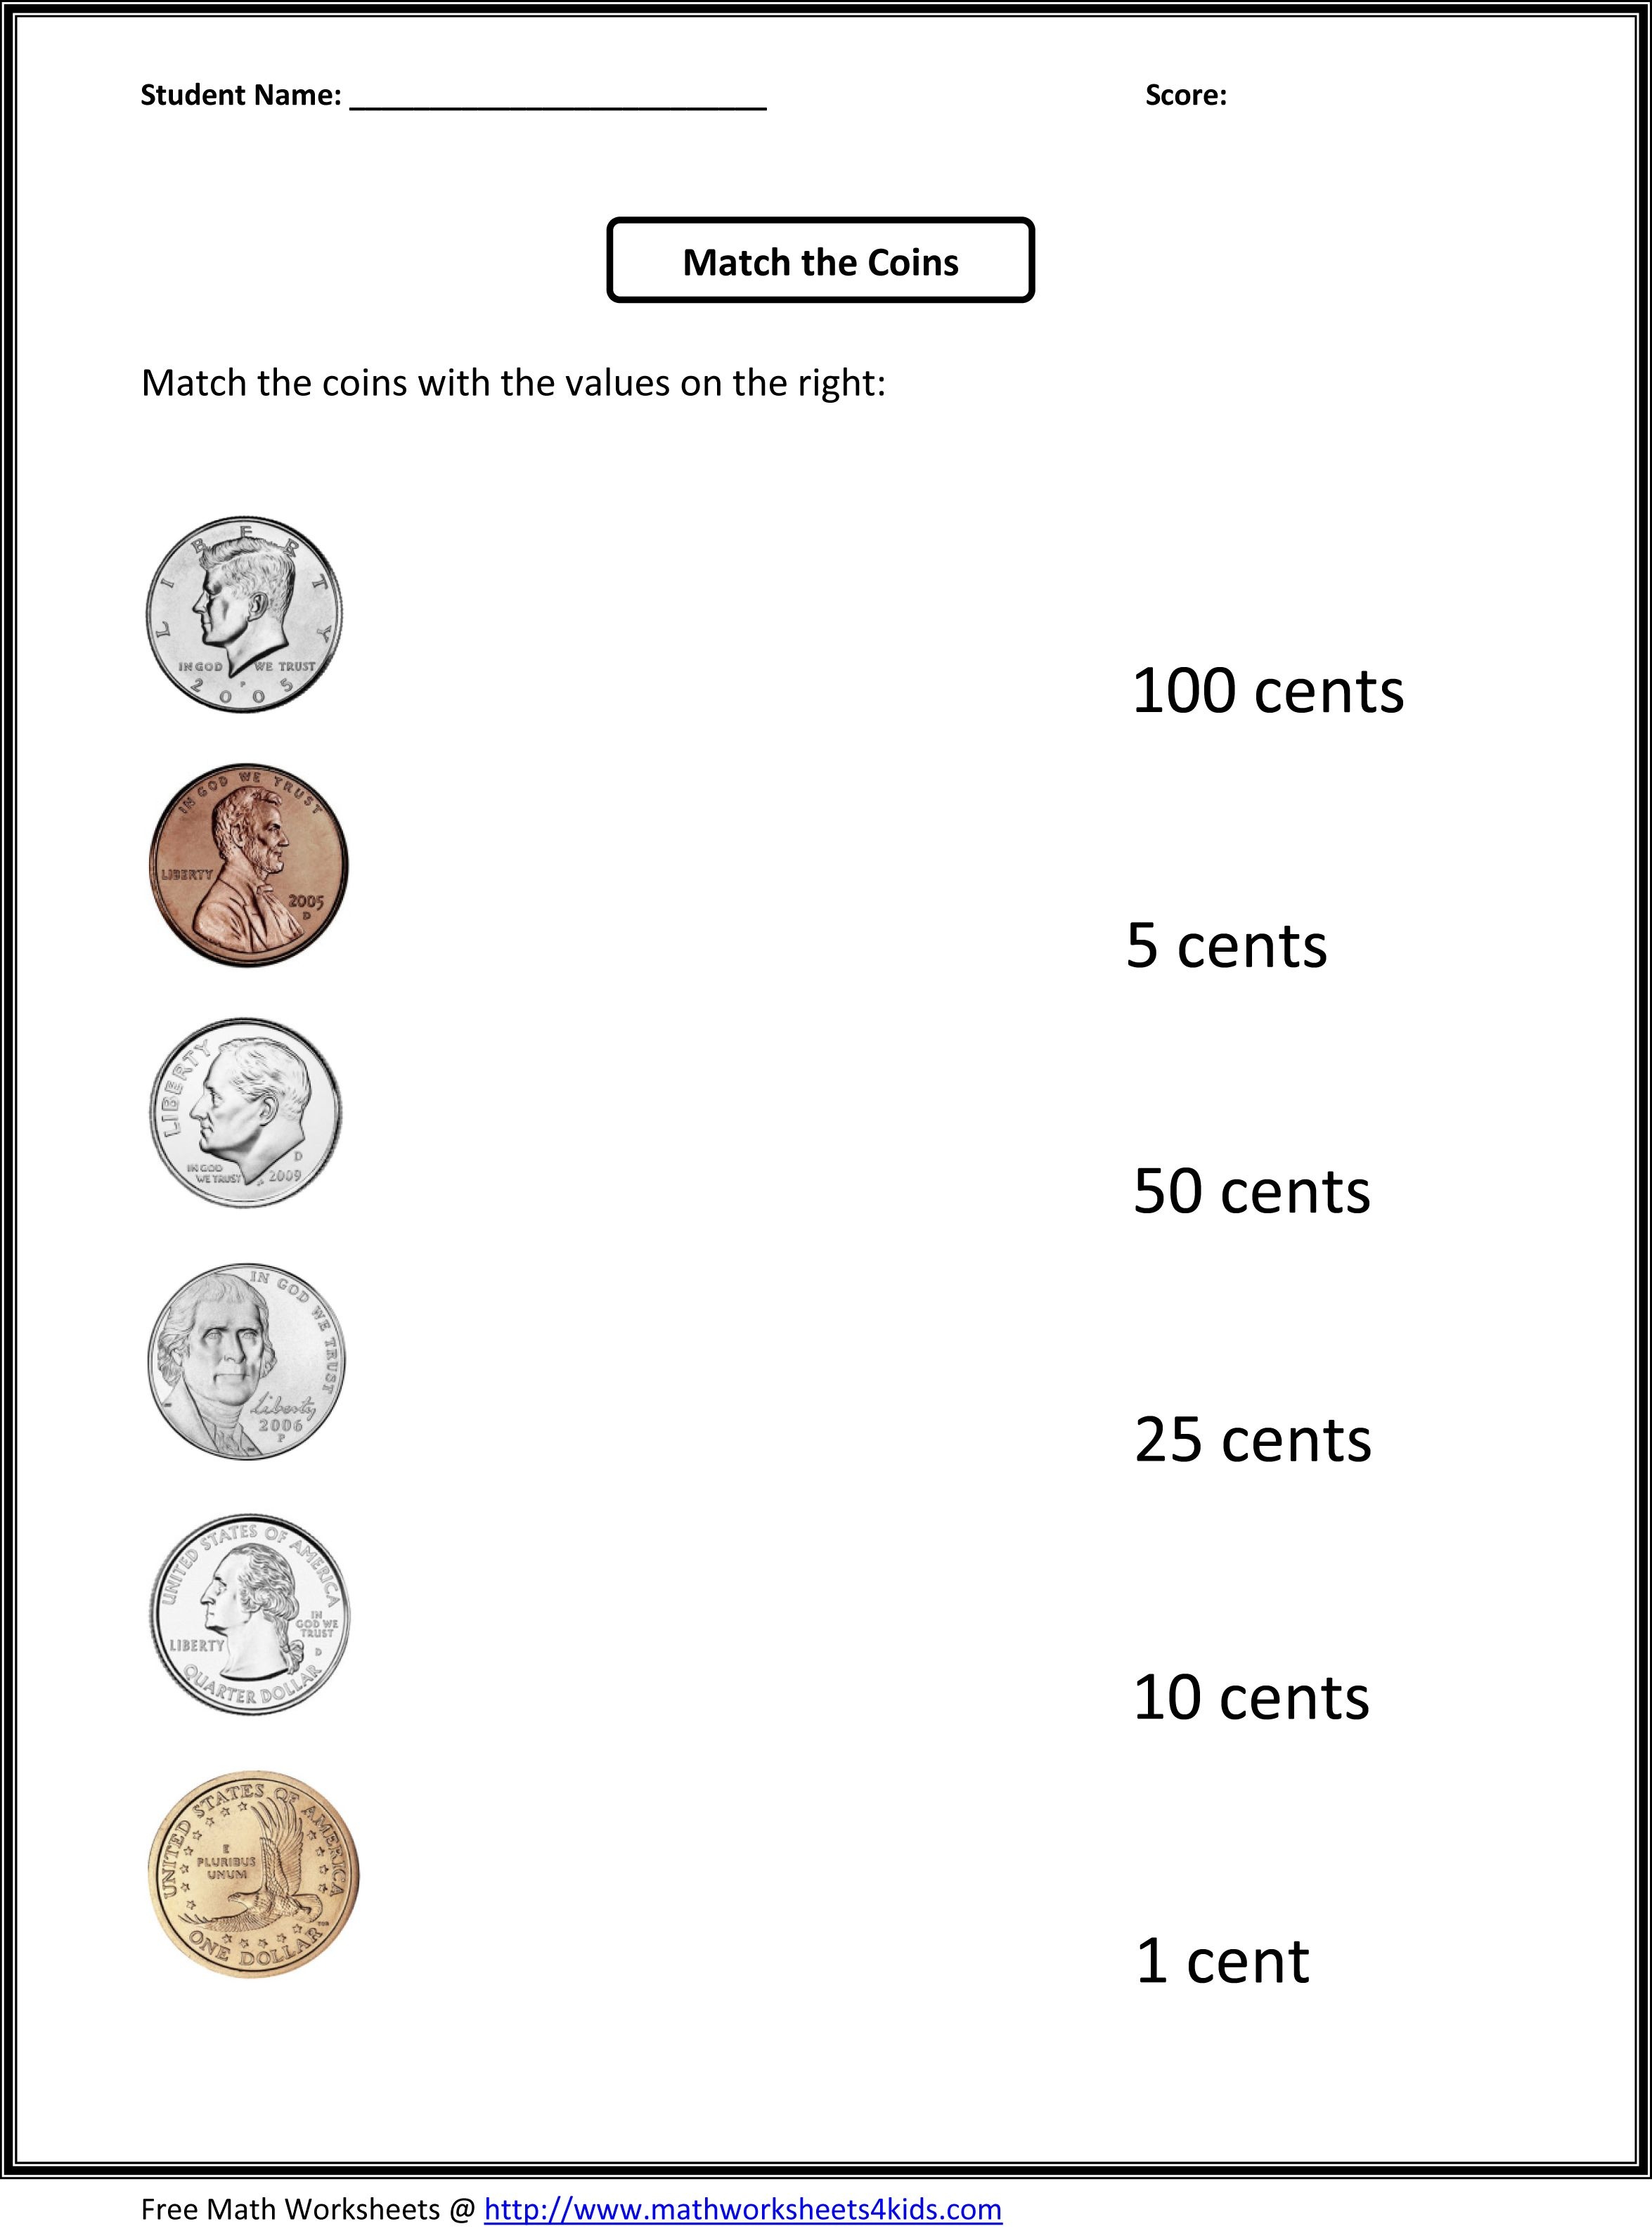 Free 1St Grade Worksheets | Match The Coins And Its Values - Free Printable Money Worksheets For 1St Grade